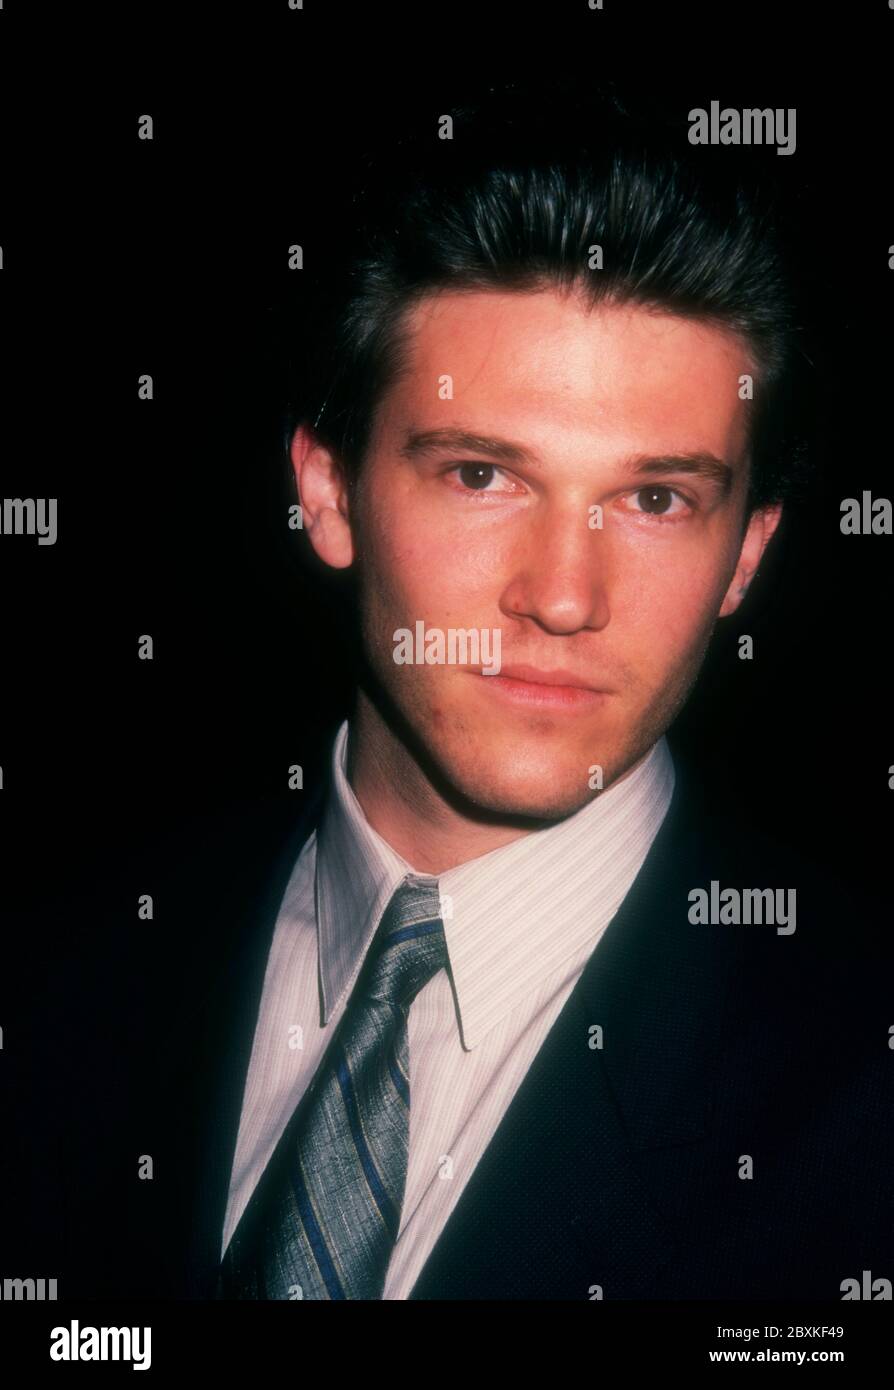 Beverly Hills, California, USA 27th September 1995 Actor Loren Dean attends Universal Pictures 'How To Make An American Quilt' Premiere at Samuel Goldwyn Theatre at Academy of Motion Picture Arts & Sciences On September 27, 1995 in Beverly Hills, California, USA. Photo by Barry King/Alamy Stock Photo Stock Photo